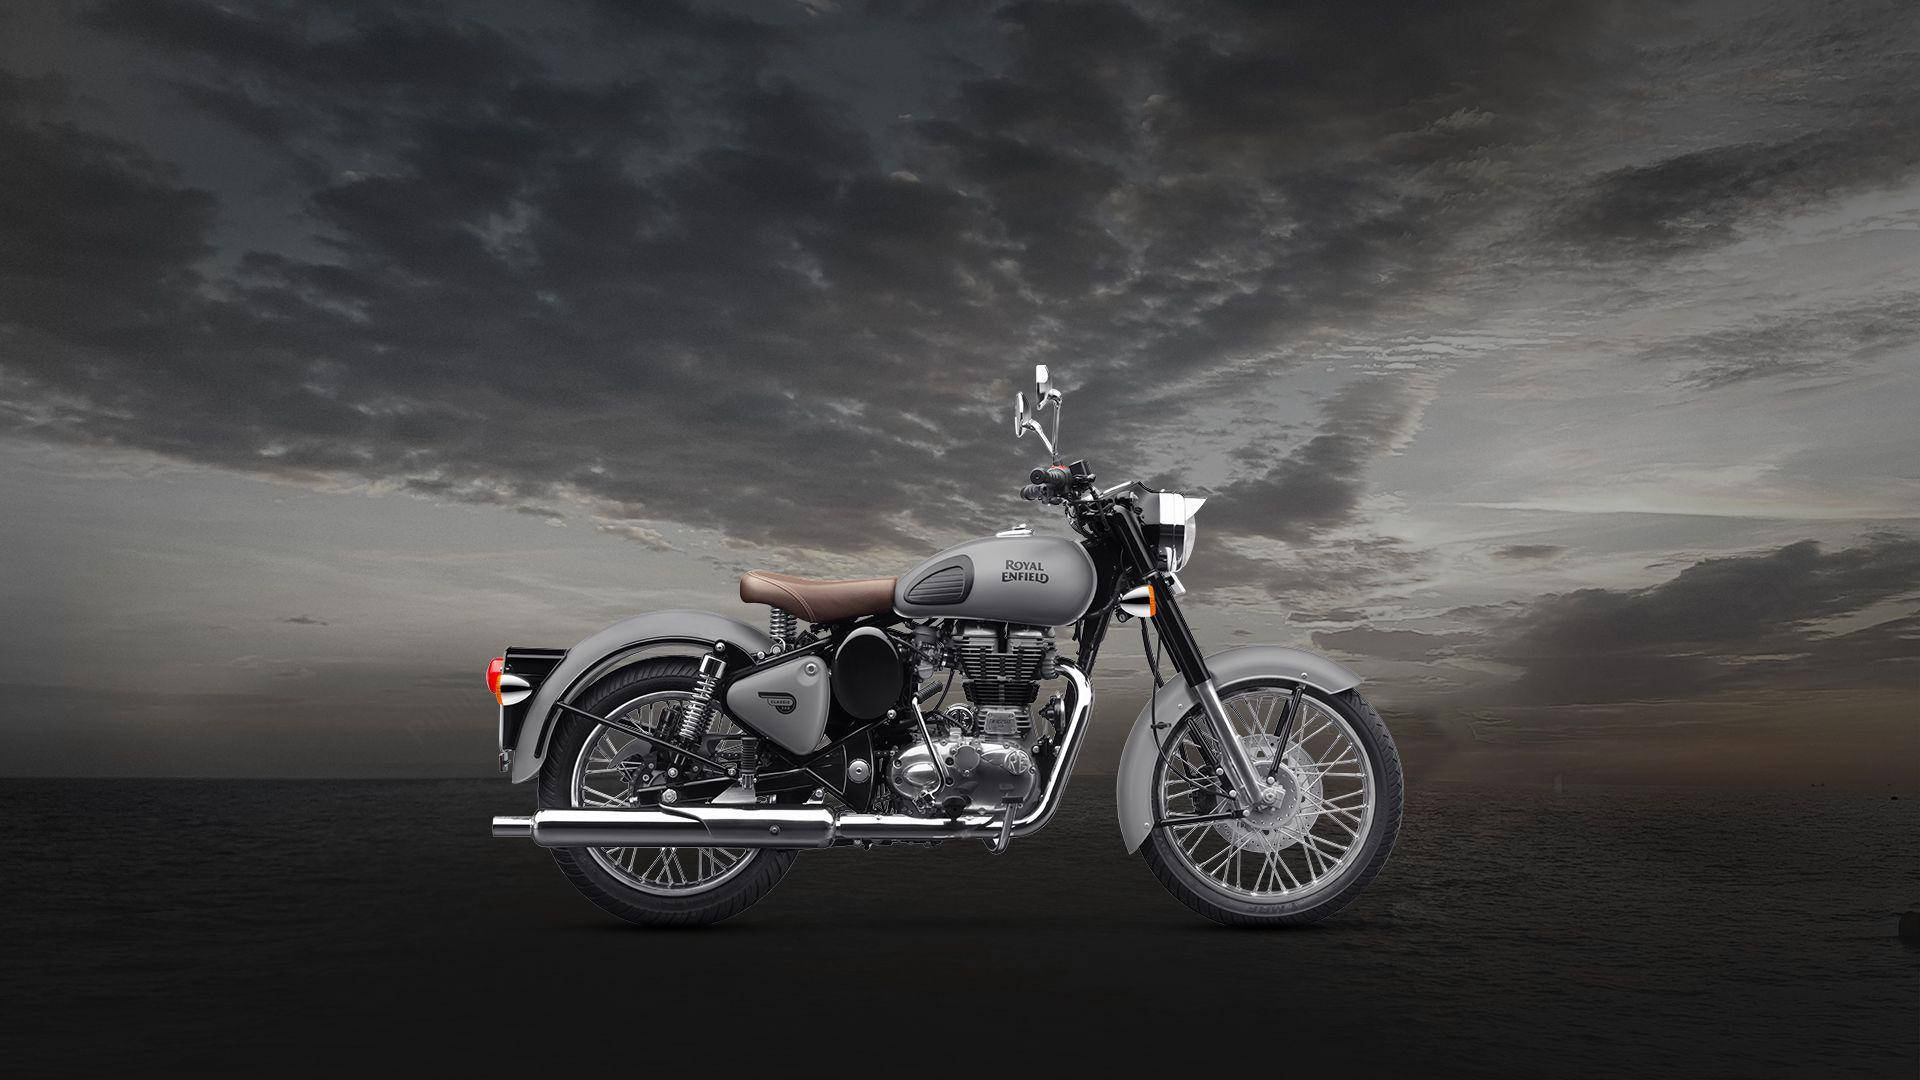 Caption: Majestic Classic 350 Royal Enfield In Hd Background